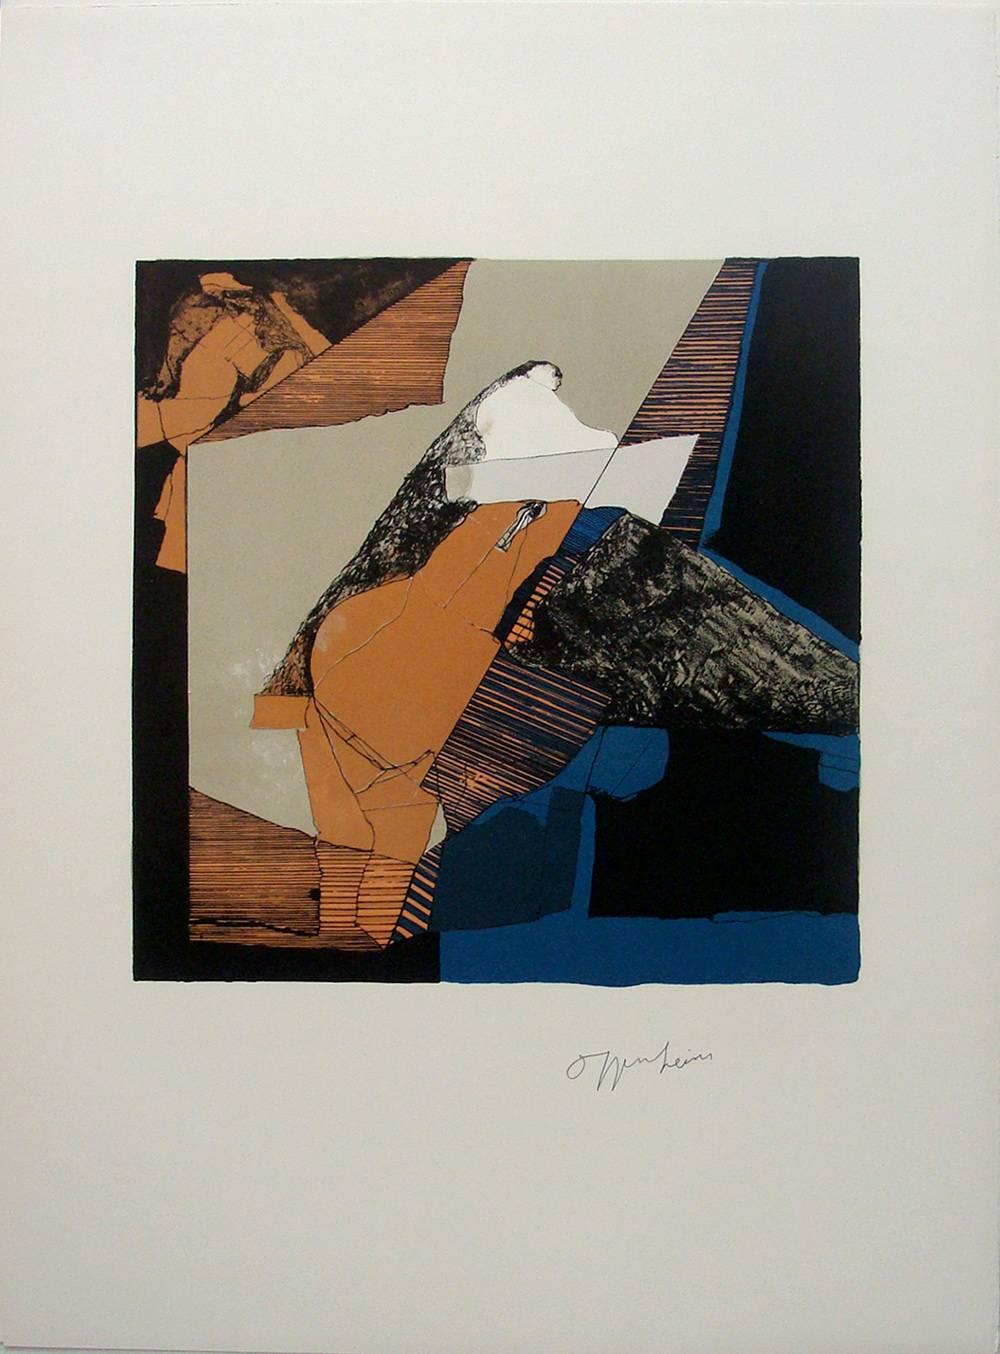 David H. Oppenheim Abstract Print - from the 10 piece suite "Obsession" 1975